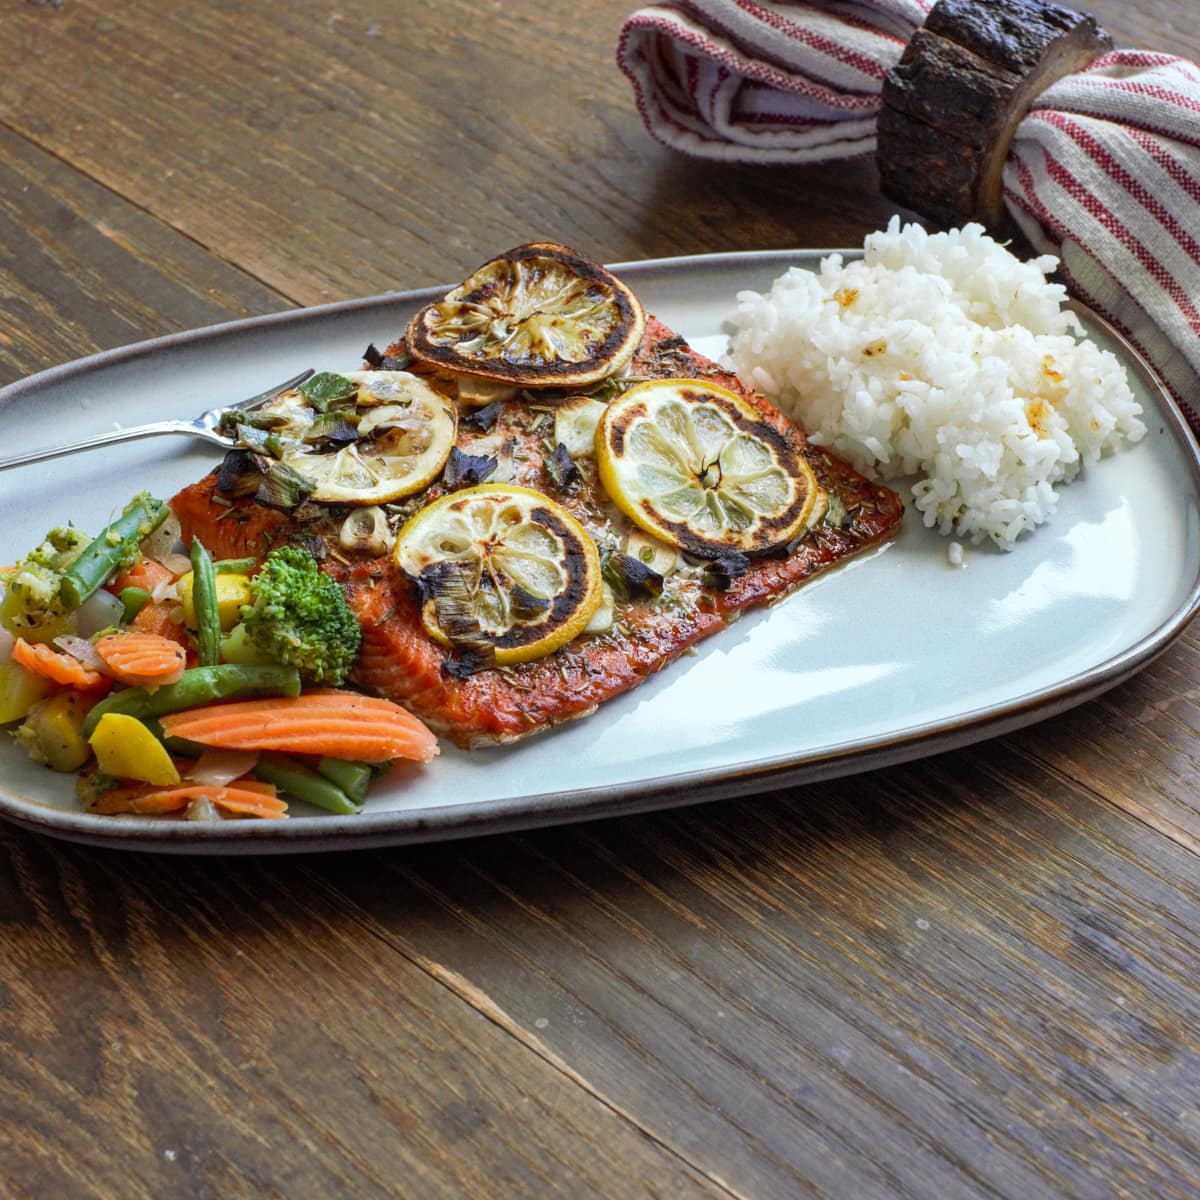 Ooni wood plank salmon on a wood table, served with rice and vegetables.